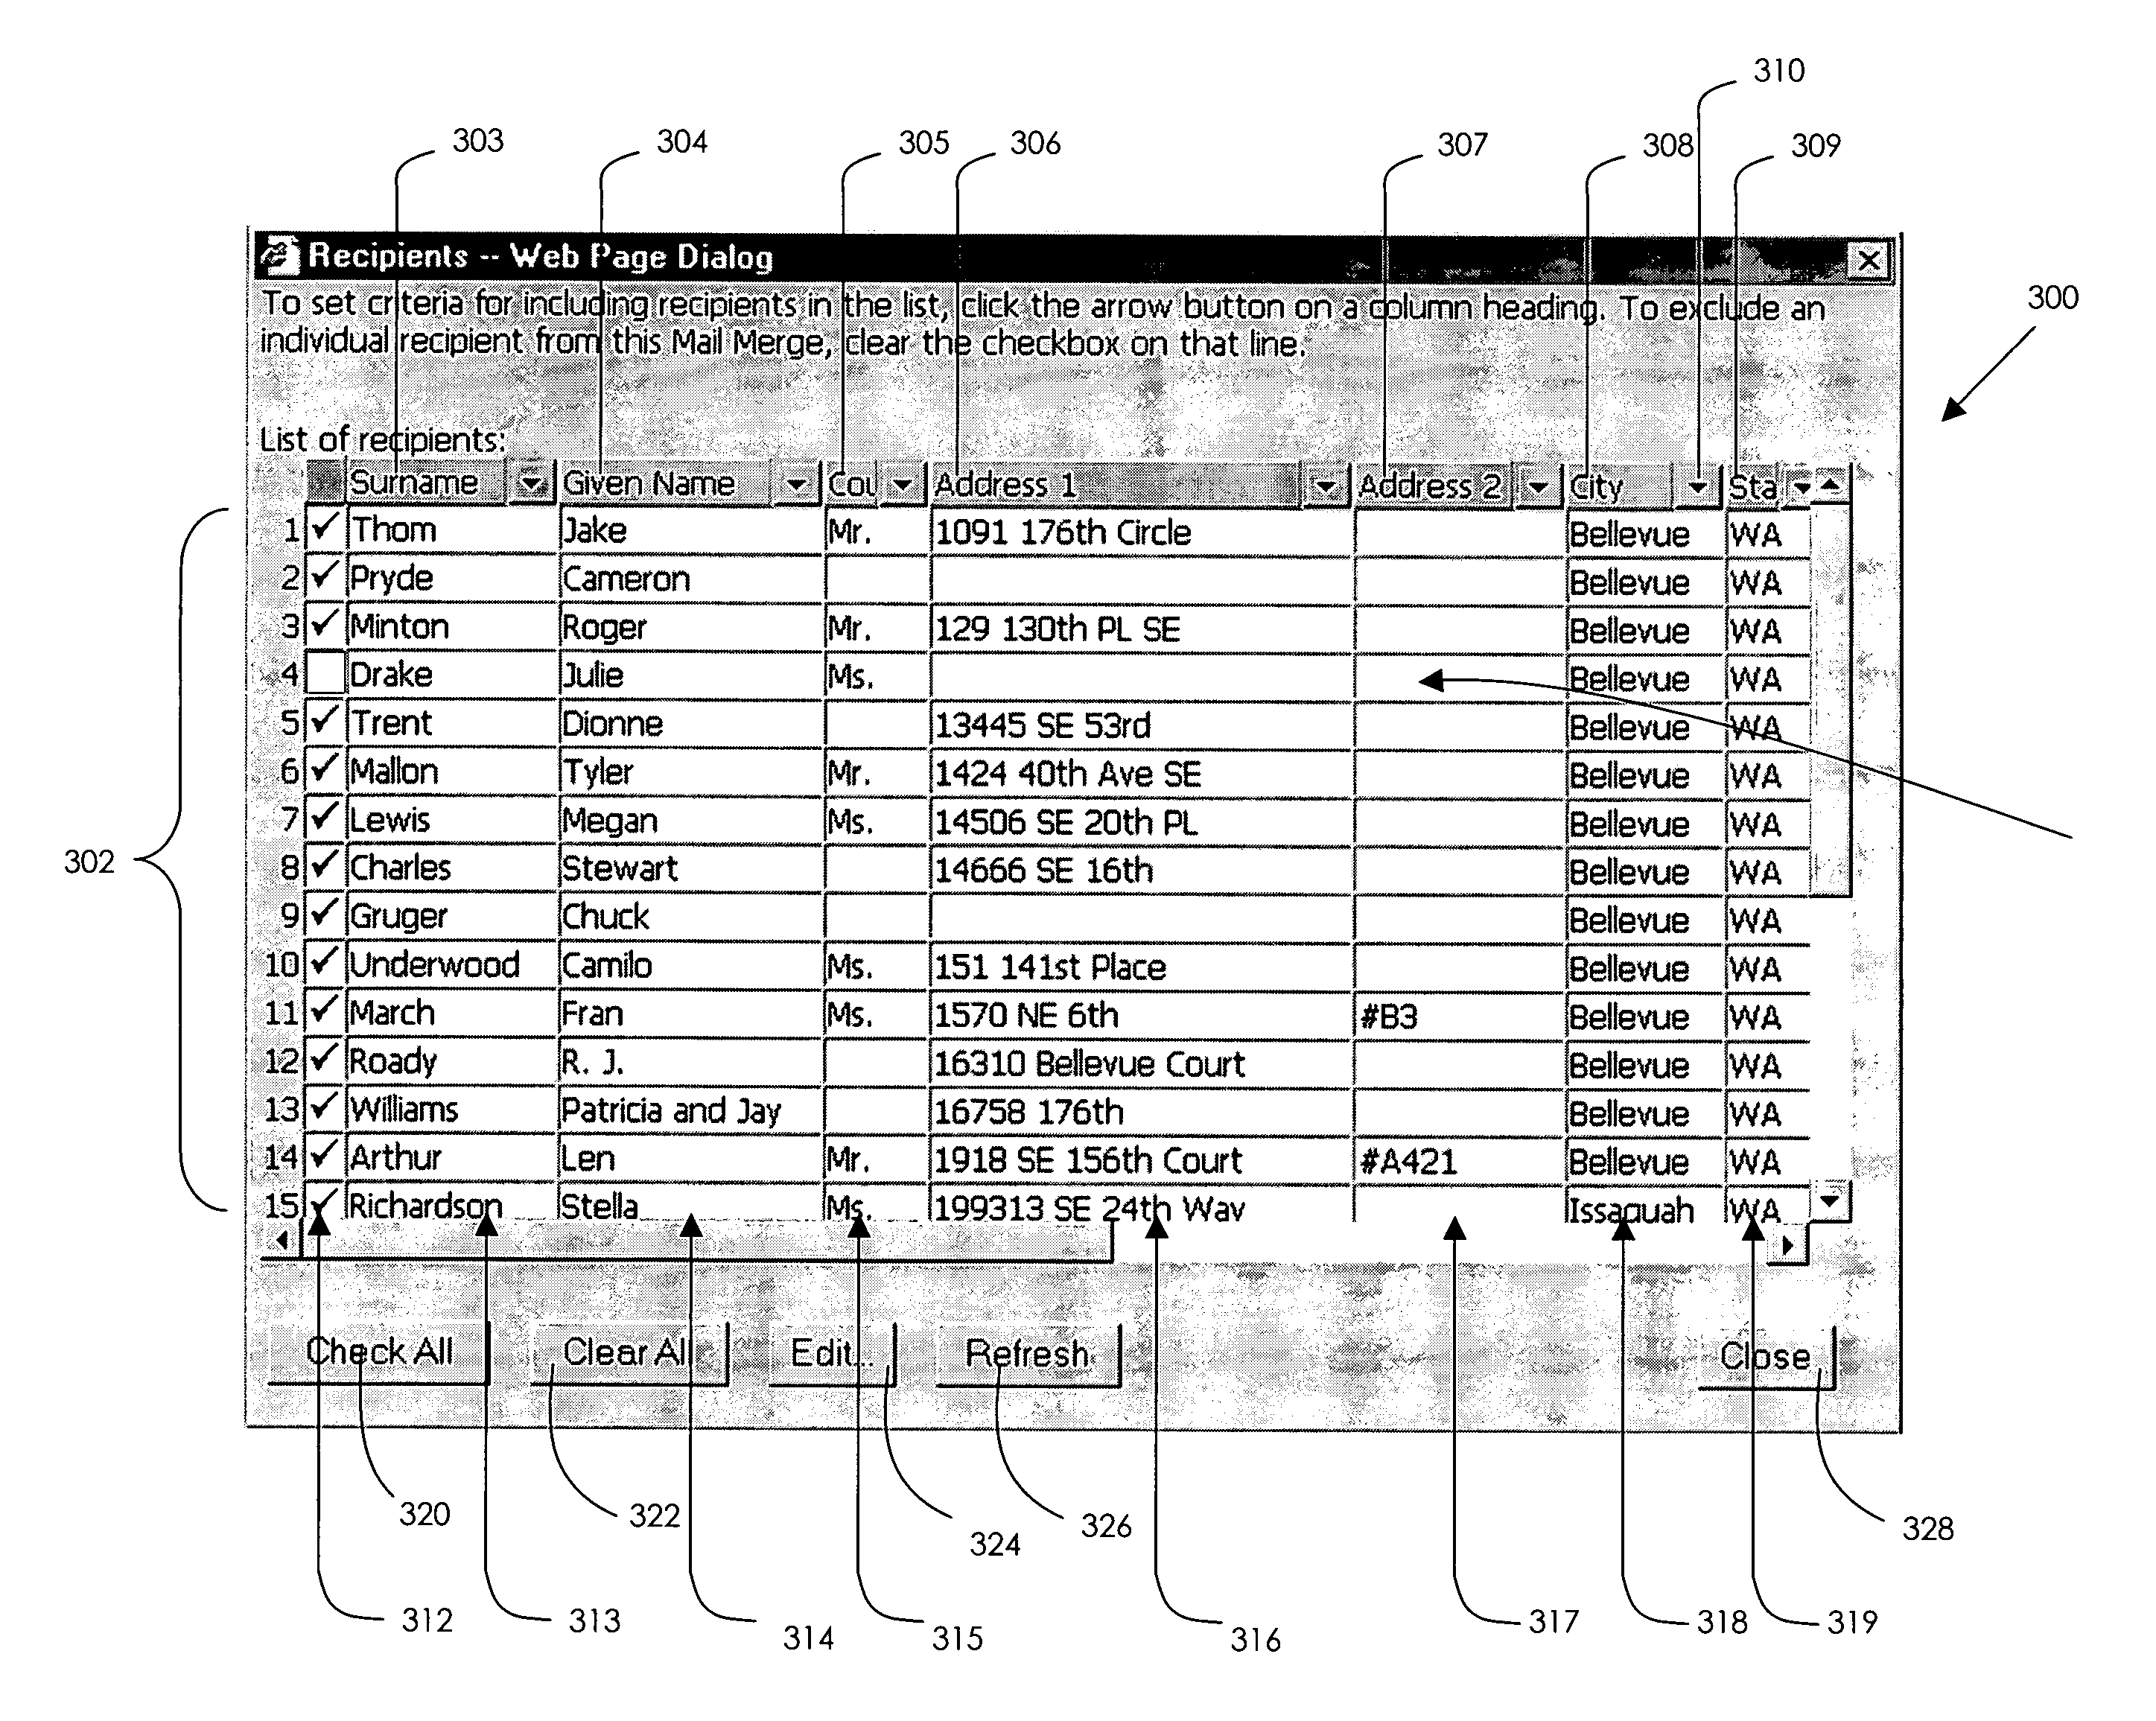 System and method for filtering database records